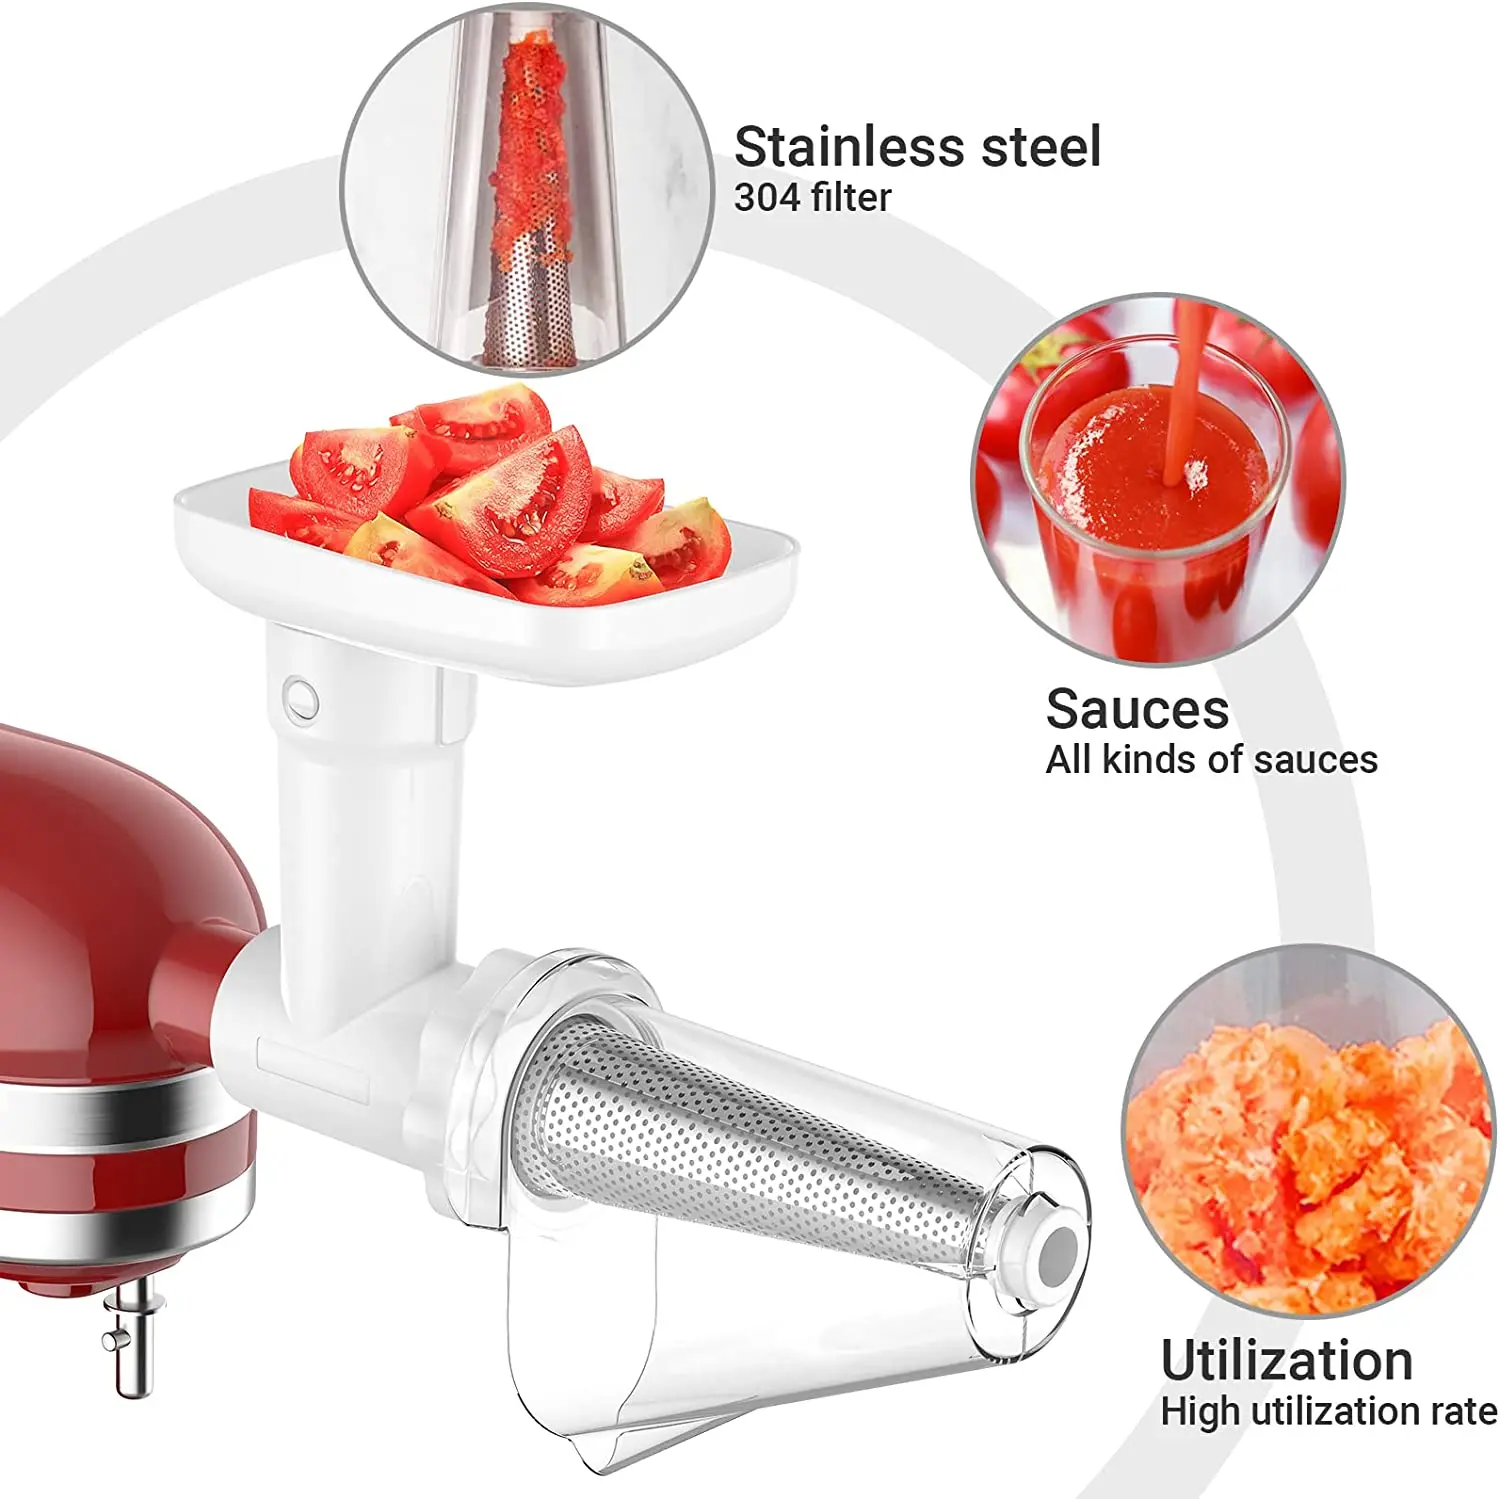  Metal Meat Grinder Attachment for KitchenAid Stand Mixer,Meat  Grinder KitchenAid Includes 4 Grinding Plates, 3 Sausage Stuffer Tubes, 2  Grinding Blades, Meat Grinder Attachment by Gvode: Home & Kitchen